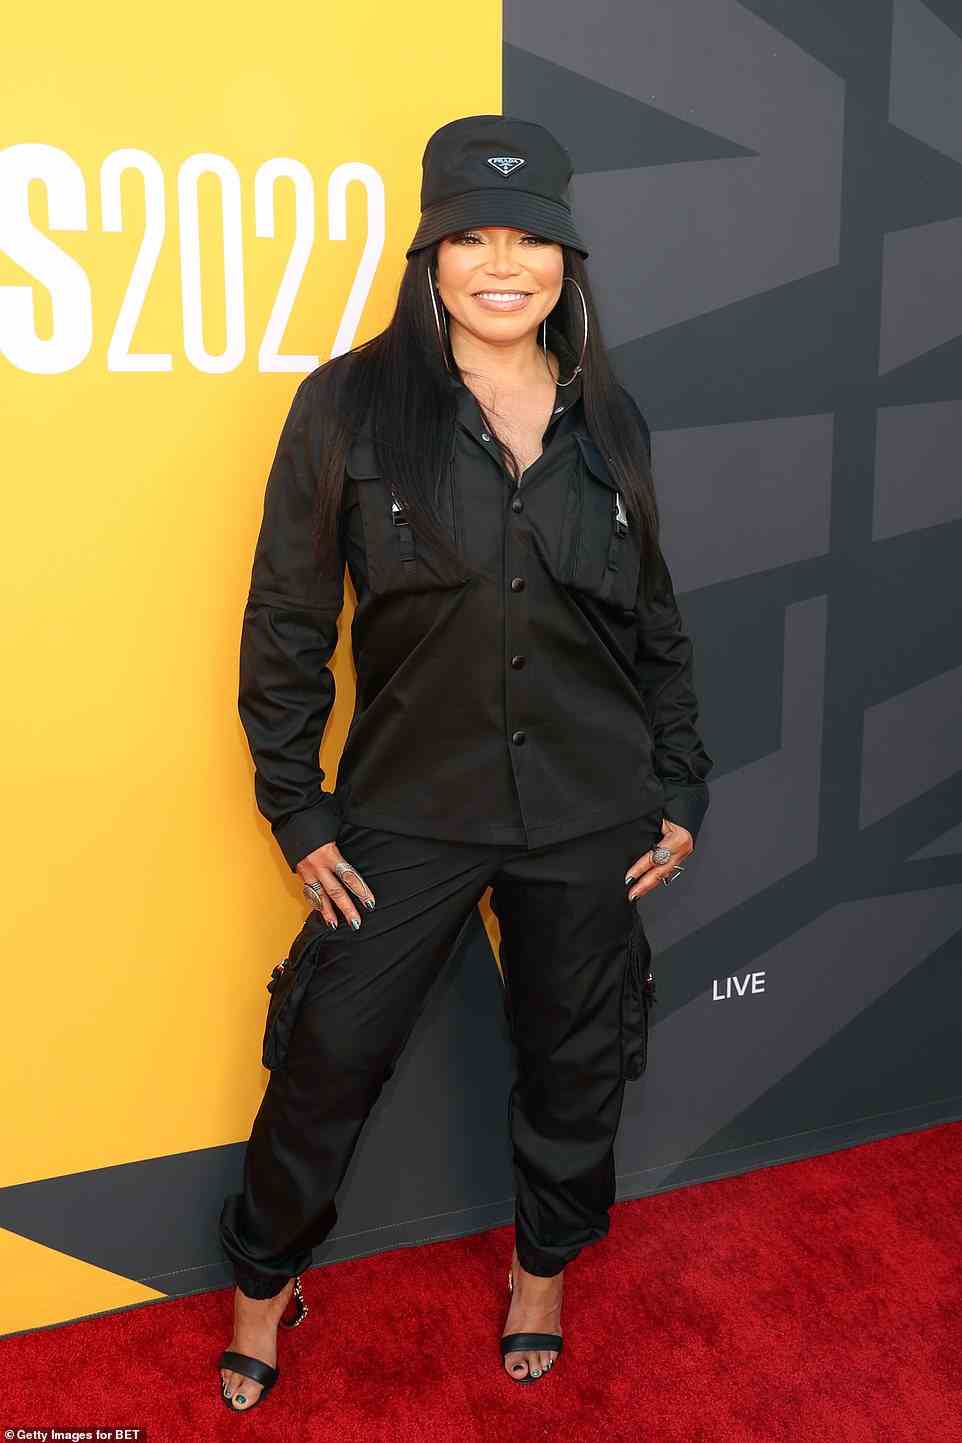 Prada: Tisha Campbell, 53, was trendy in a Prada bucket hat and matching black top and pants